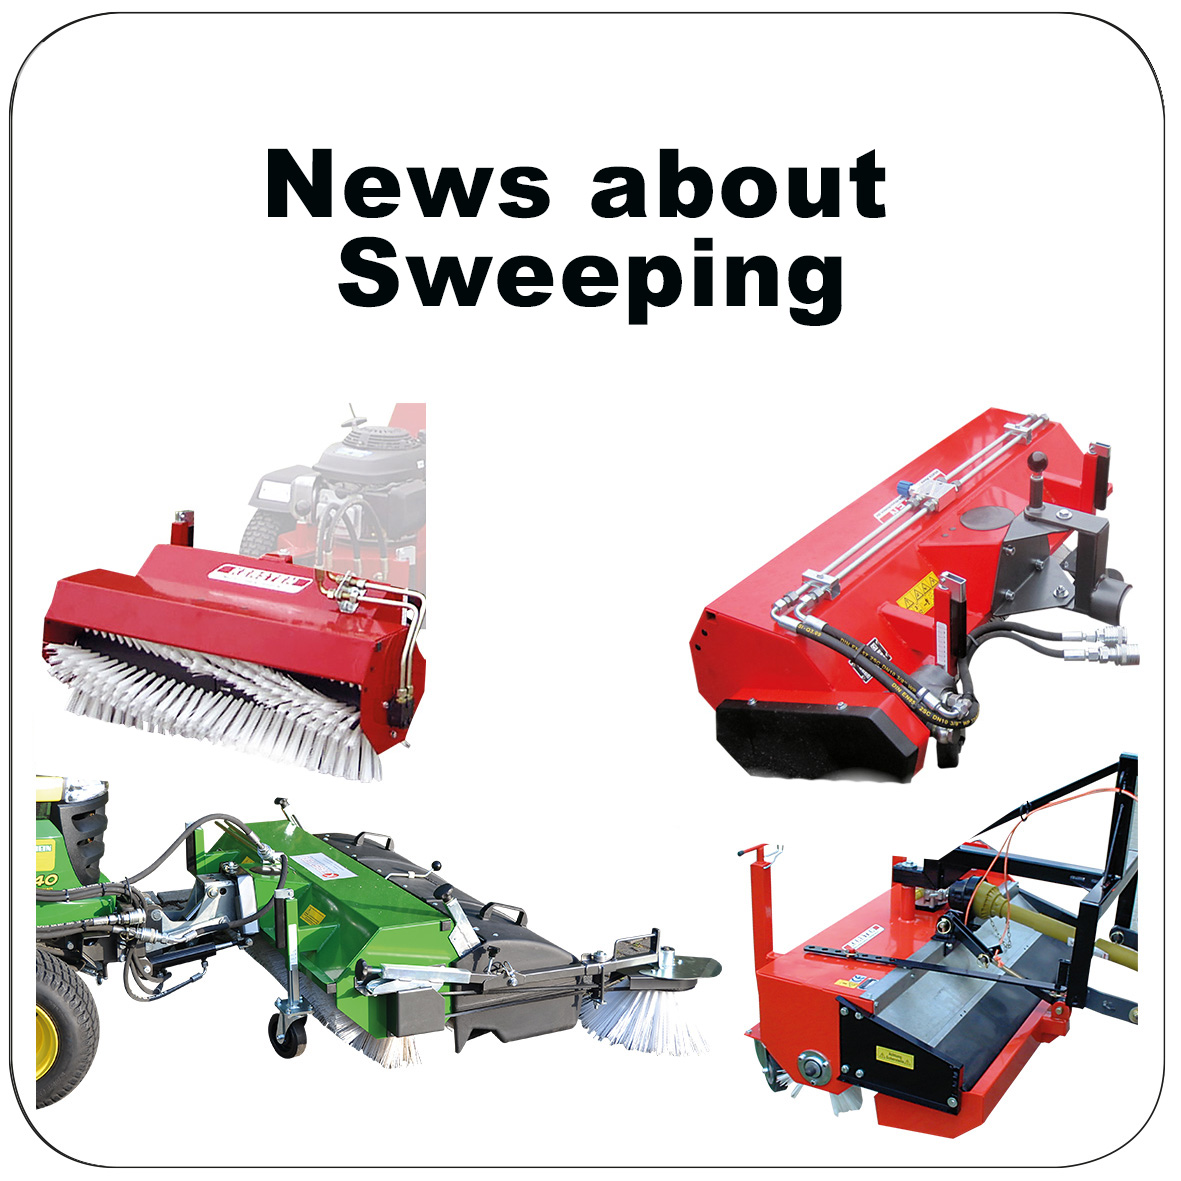 News about Sweeping